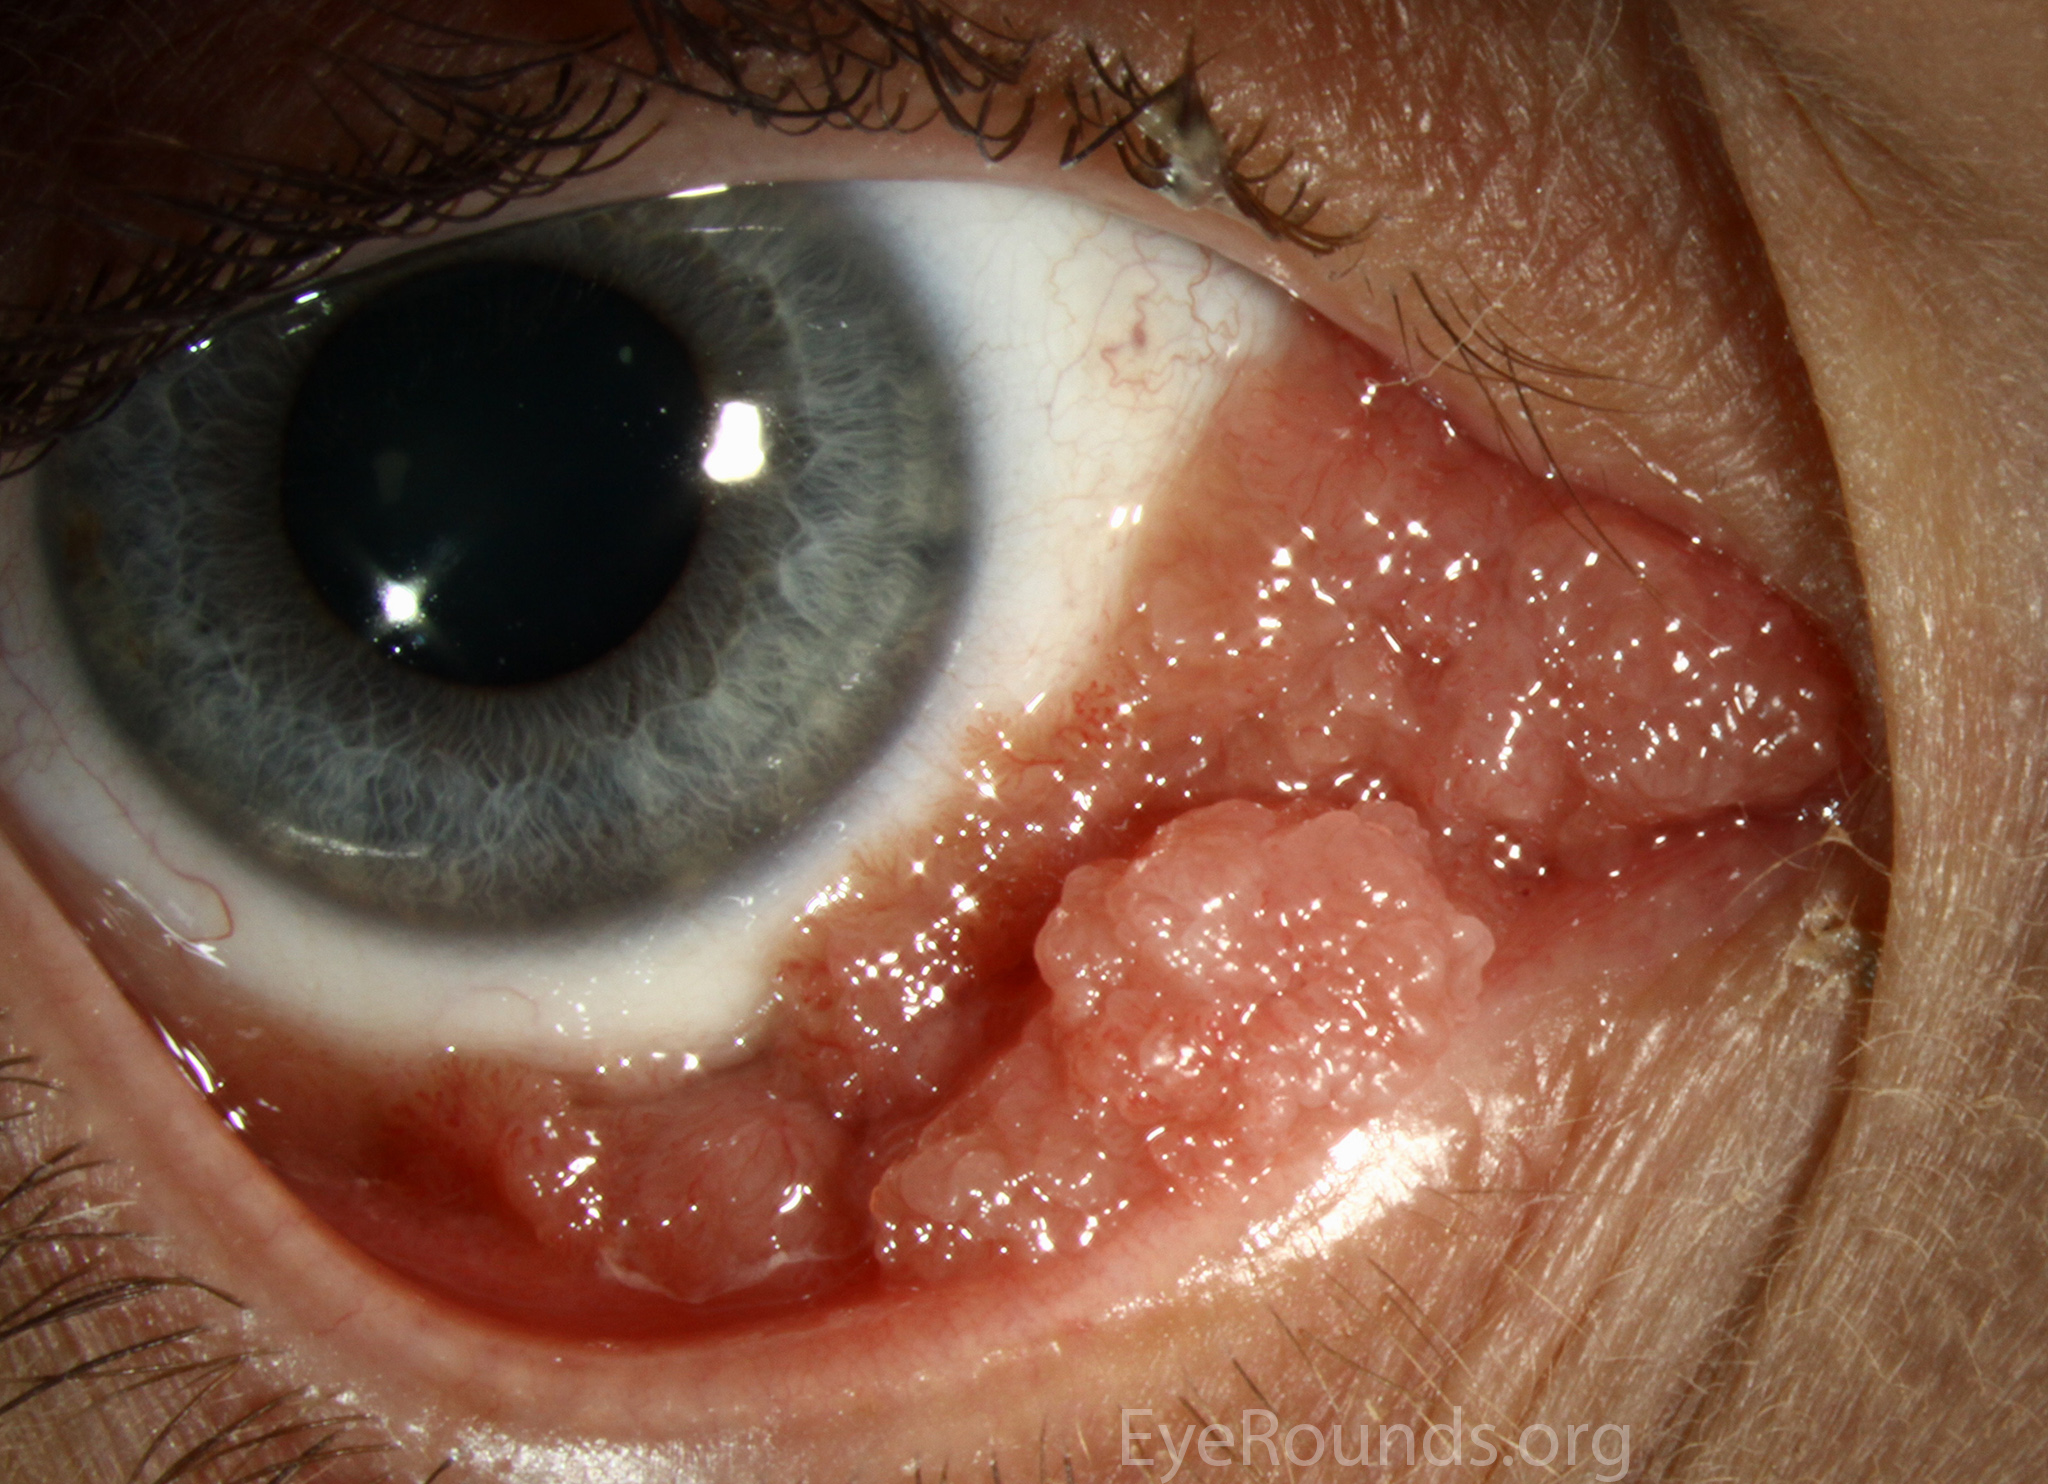 Conjunctival papillomas located in the inferior fornixt